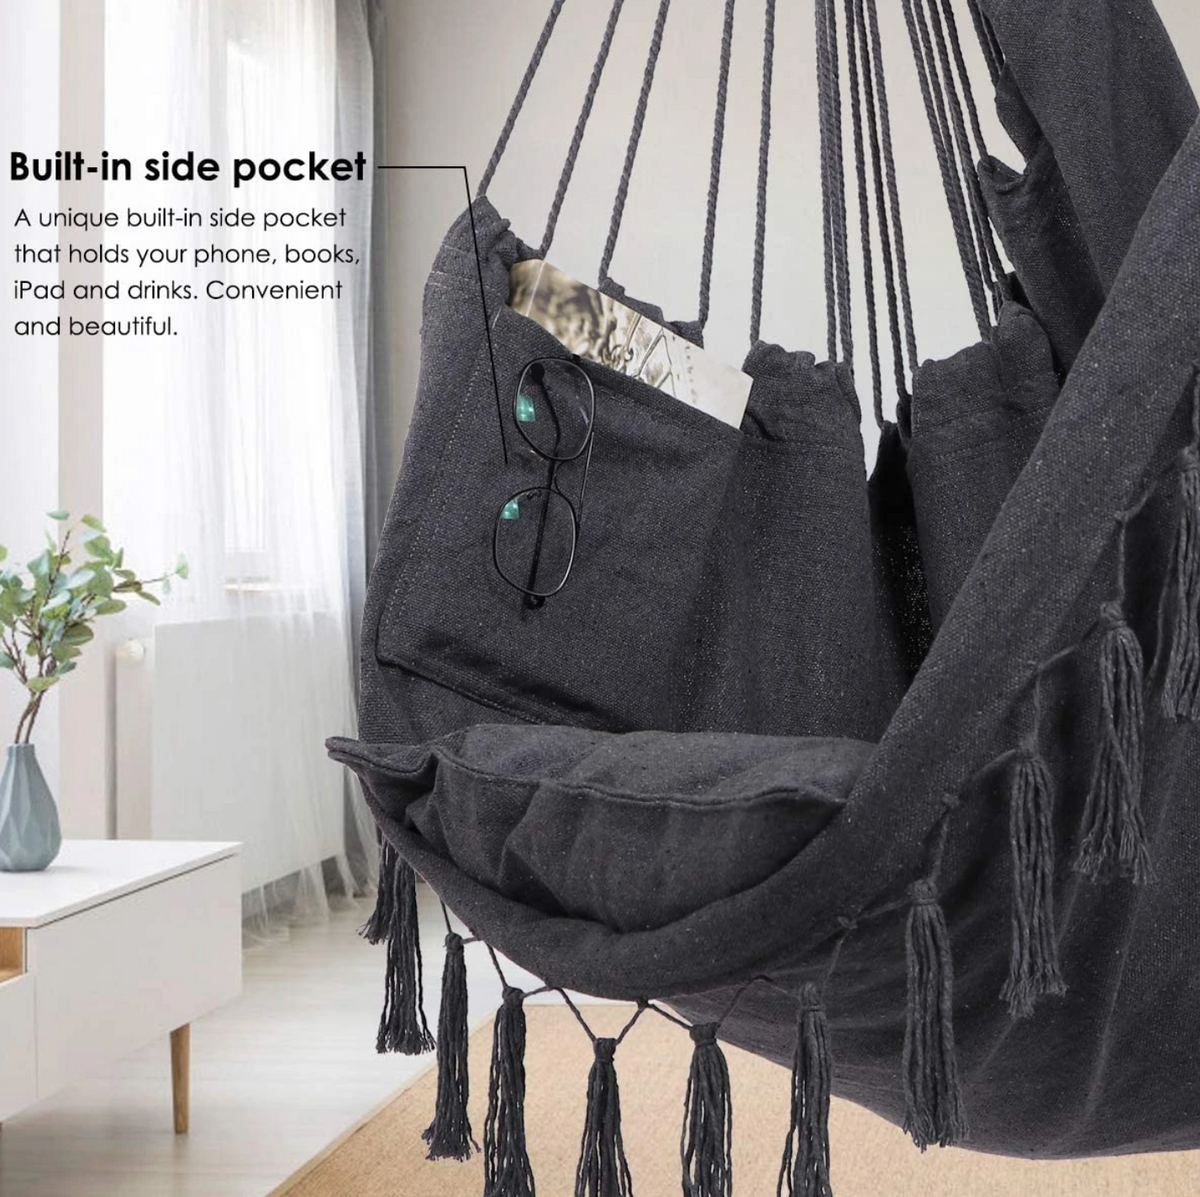 Large Tassel Hanging Chair with Pocket